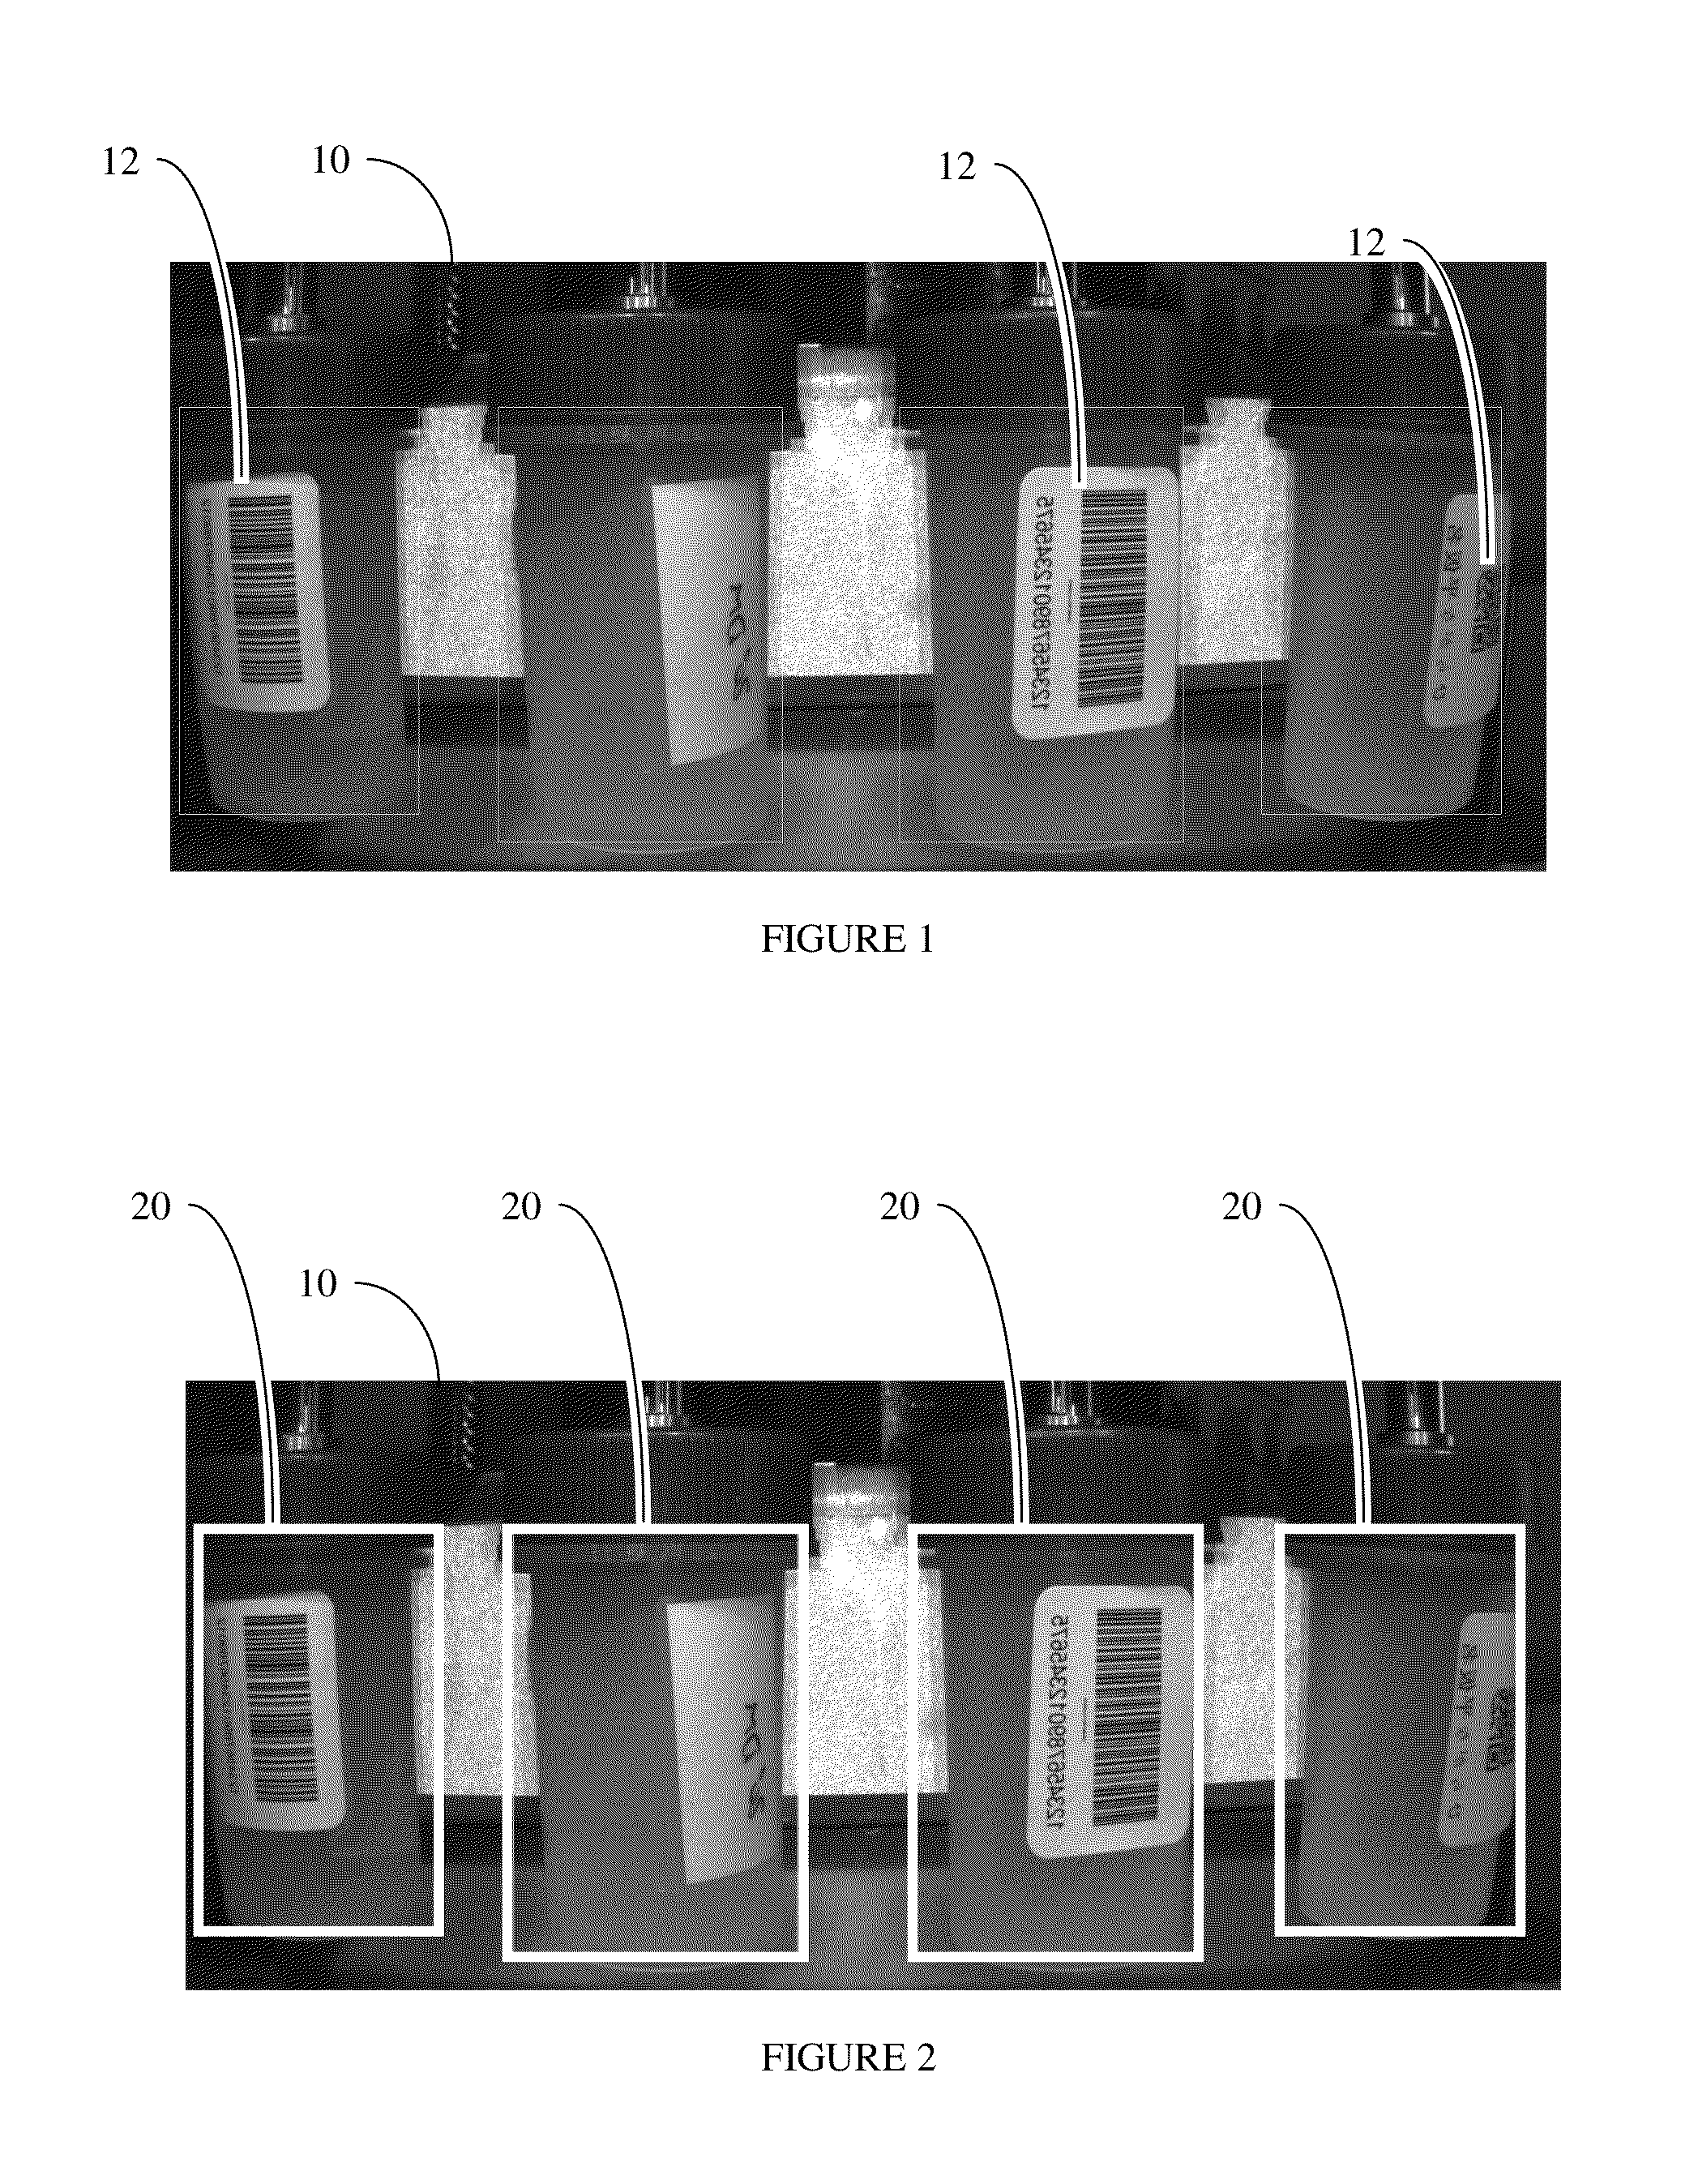 Scenario Windowing For Expedited Decoding of Multiple Barcodes